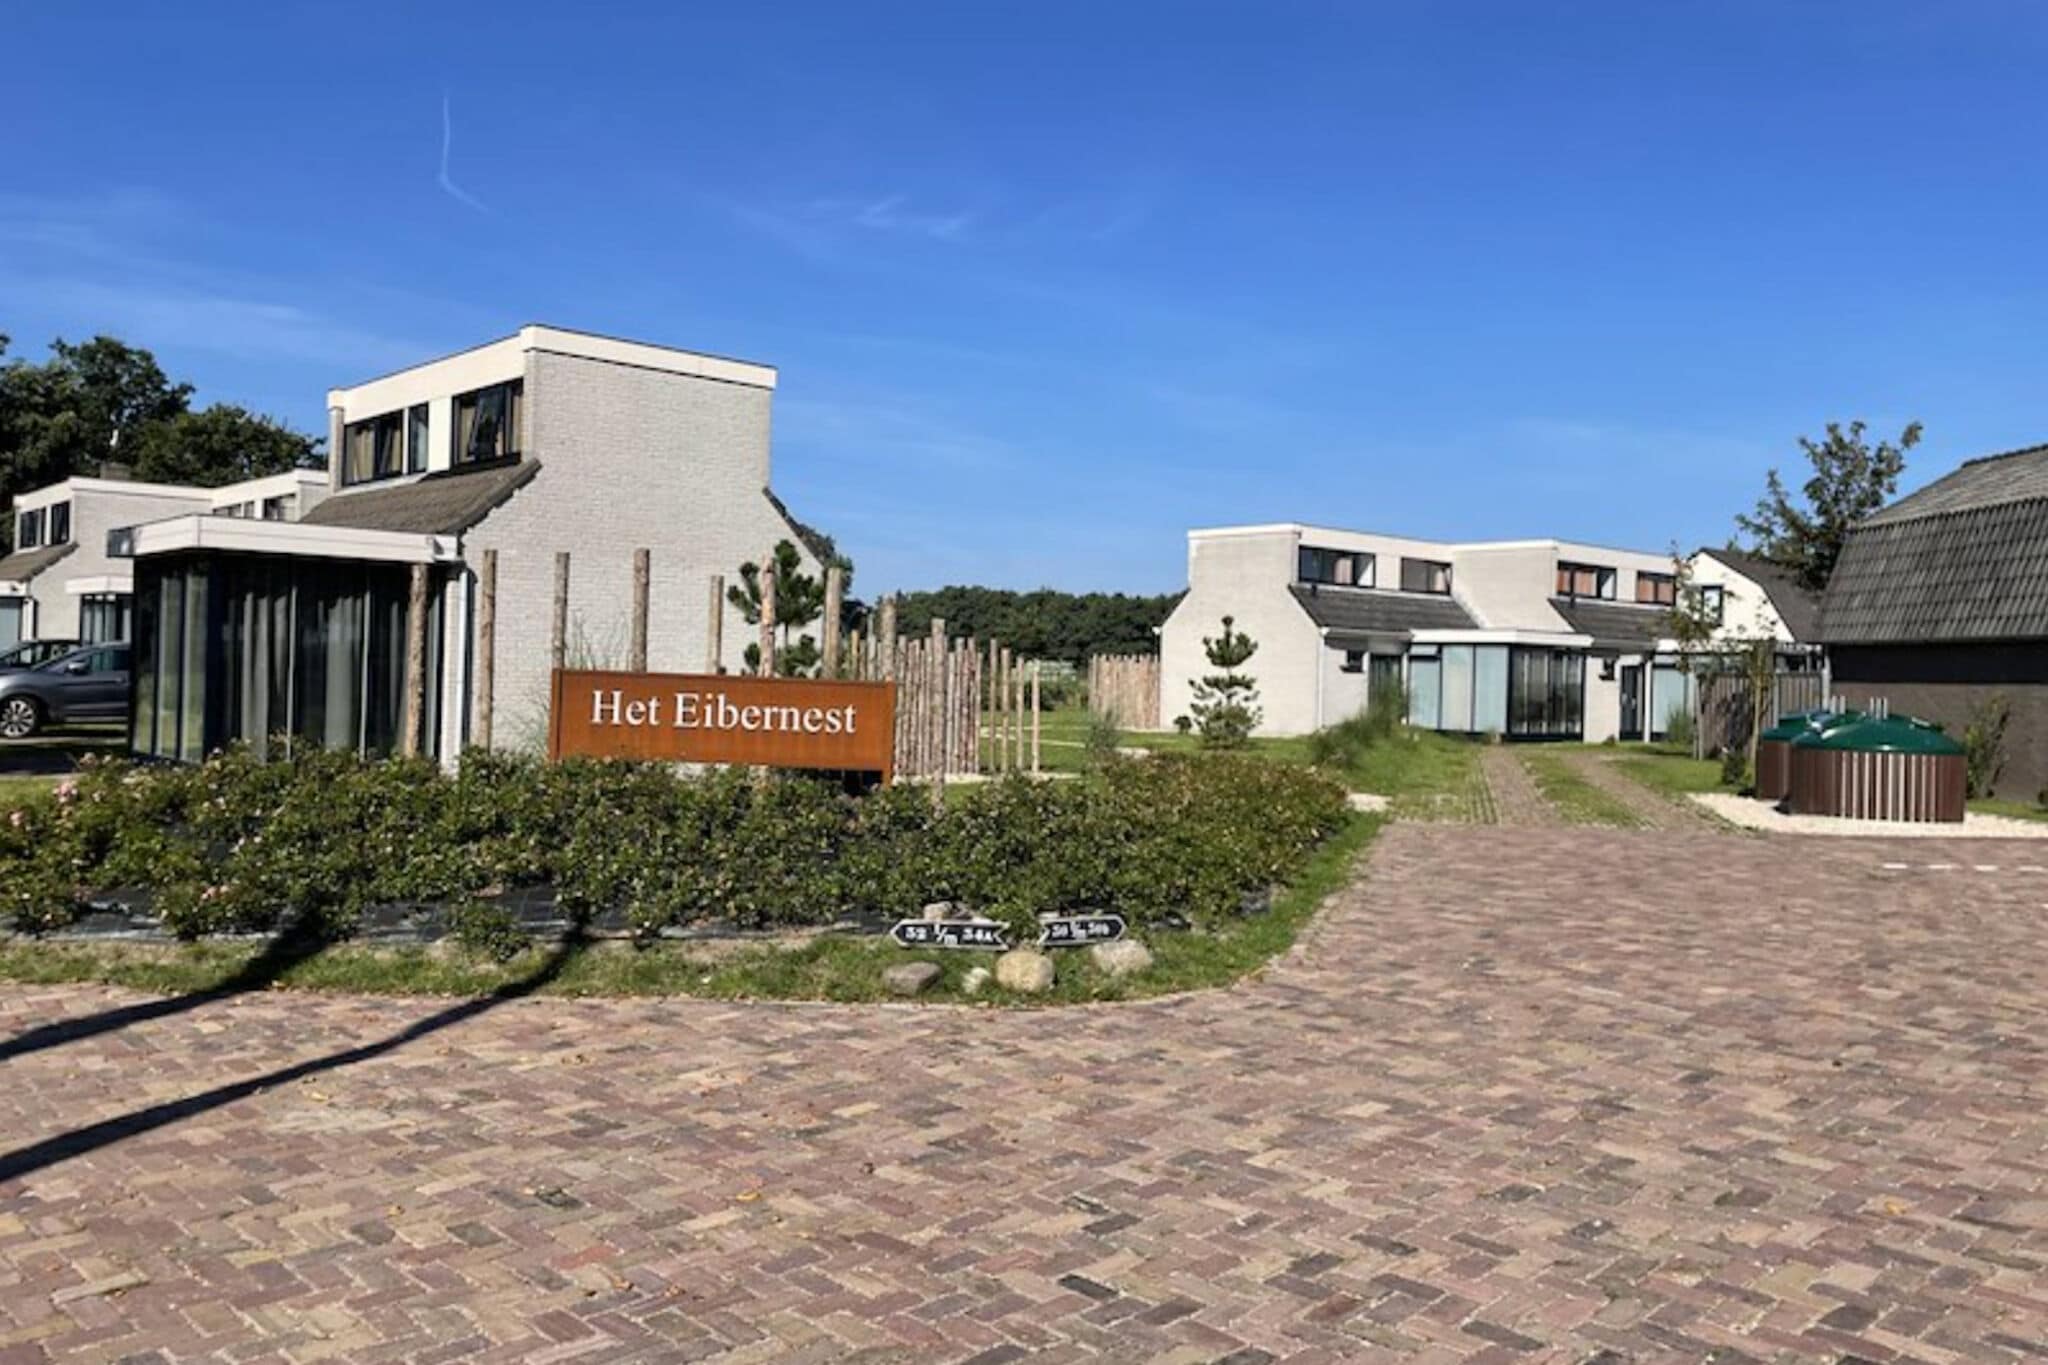 Atmospheric holiday home with WiFi in a holiday park located on Texel